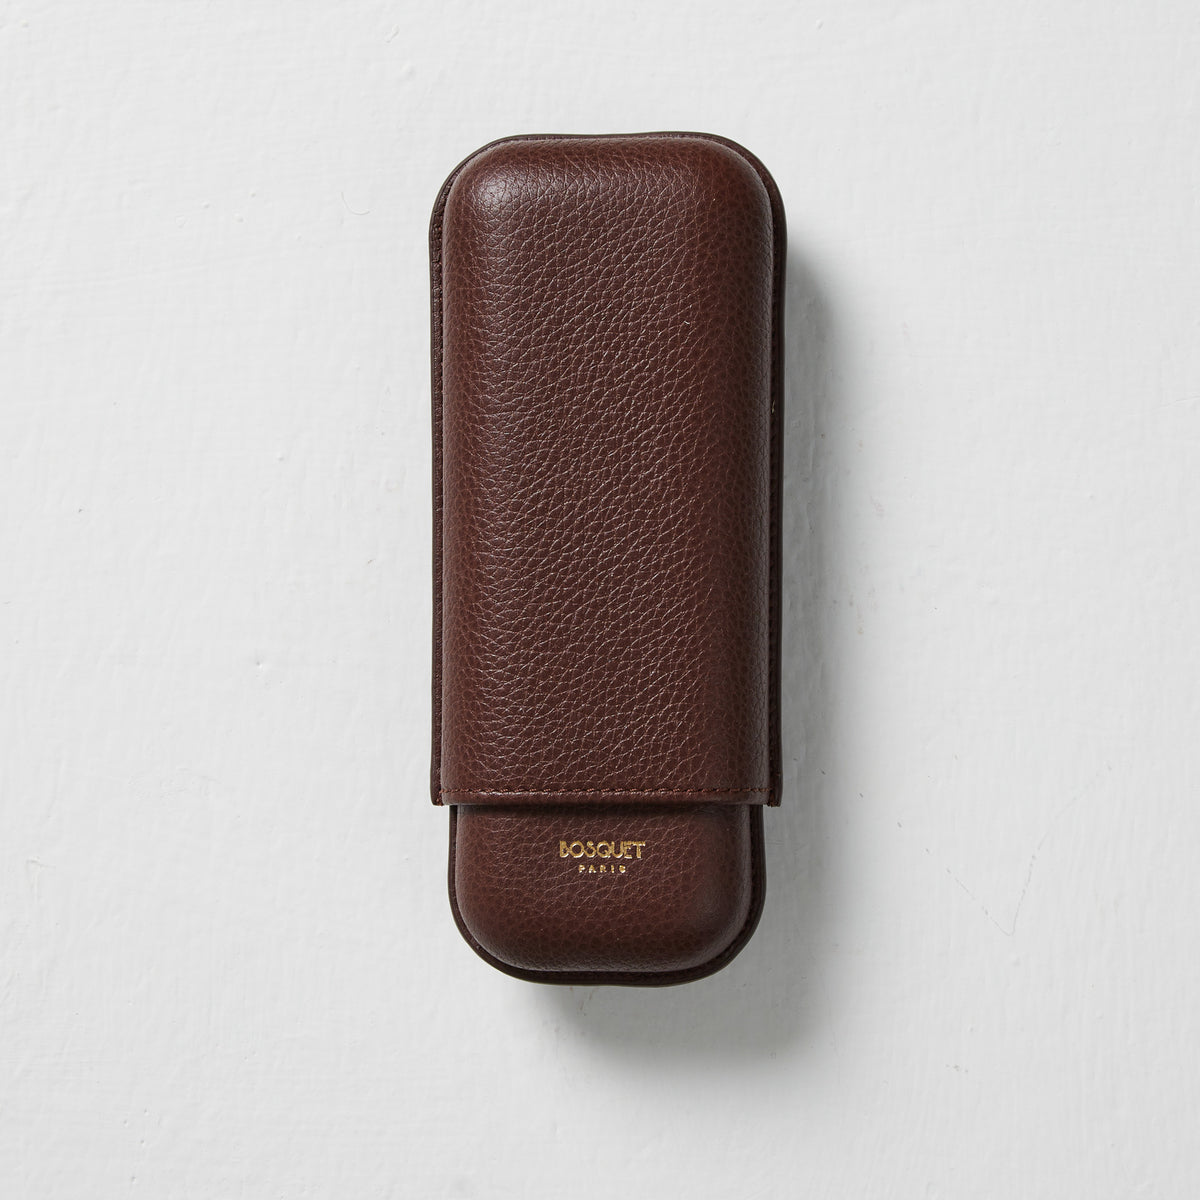 A Bosque Smooth Dark Brown Leather Cigar Case on a white surface.